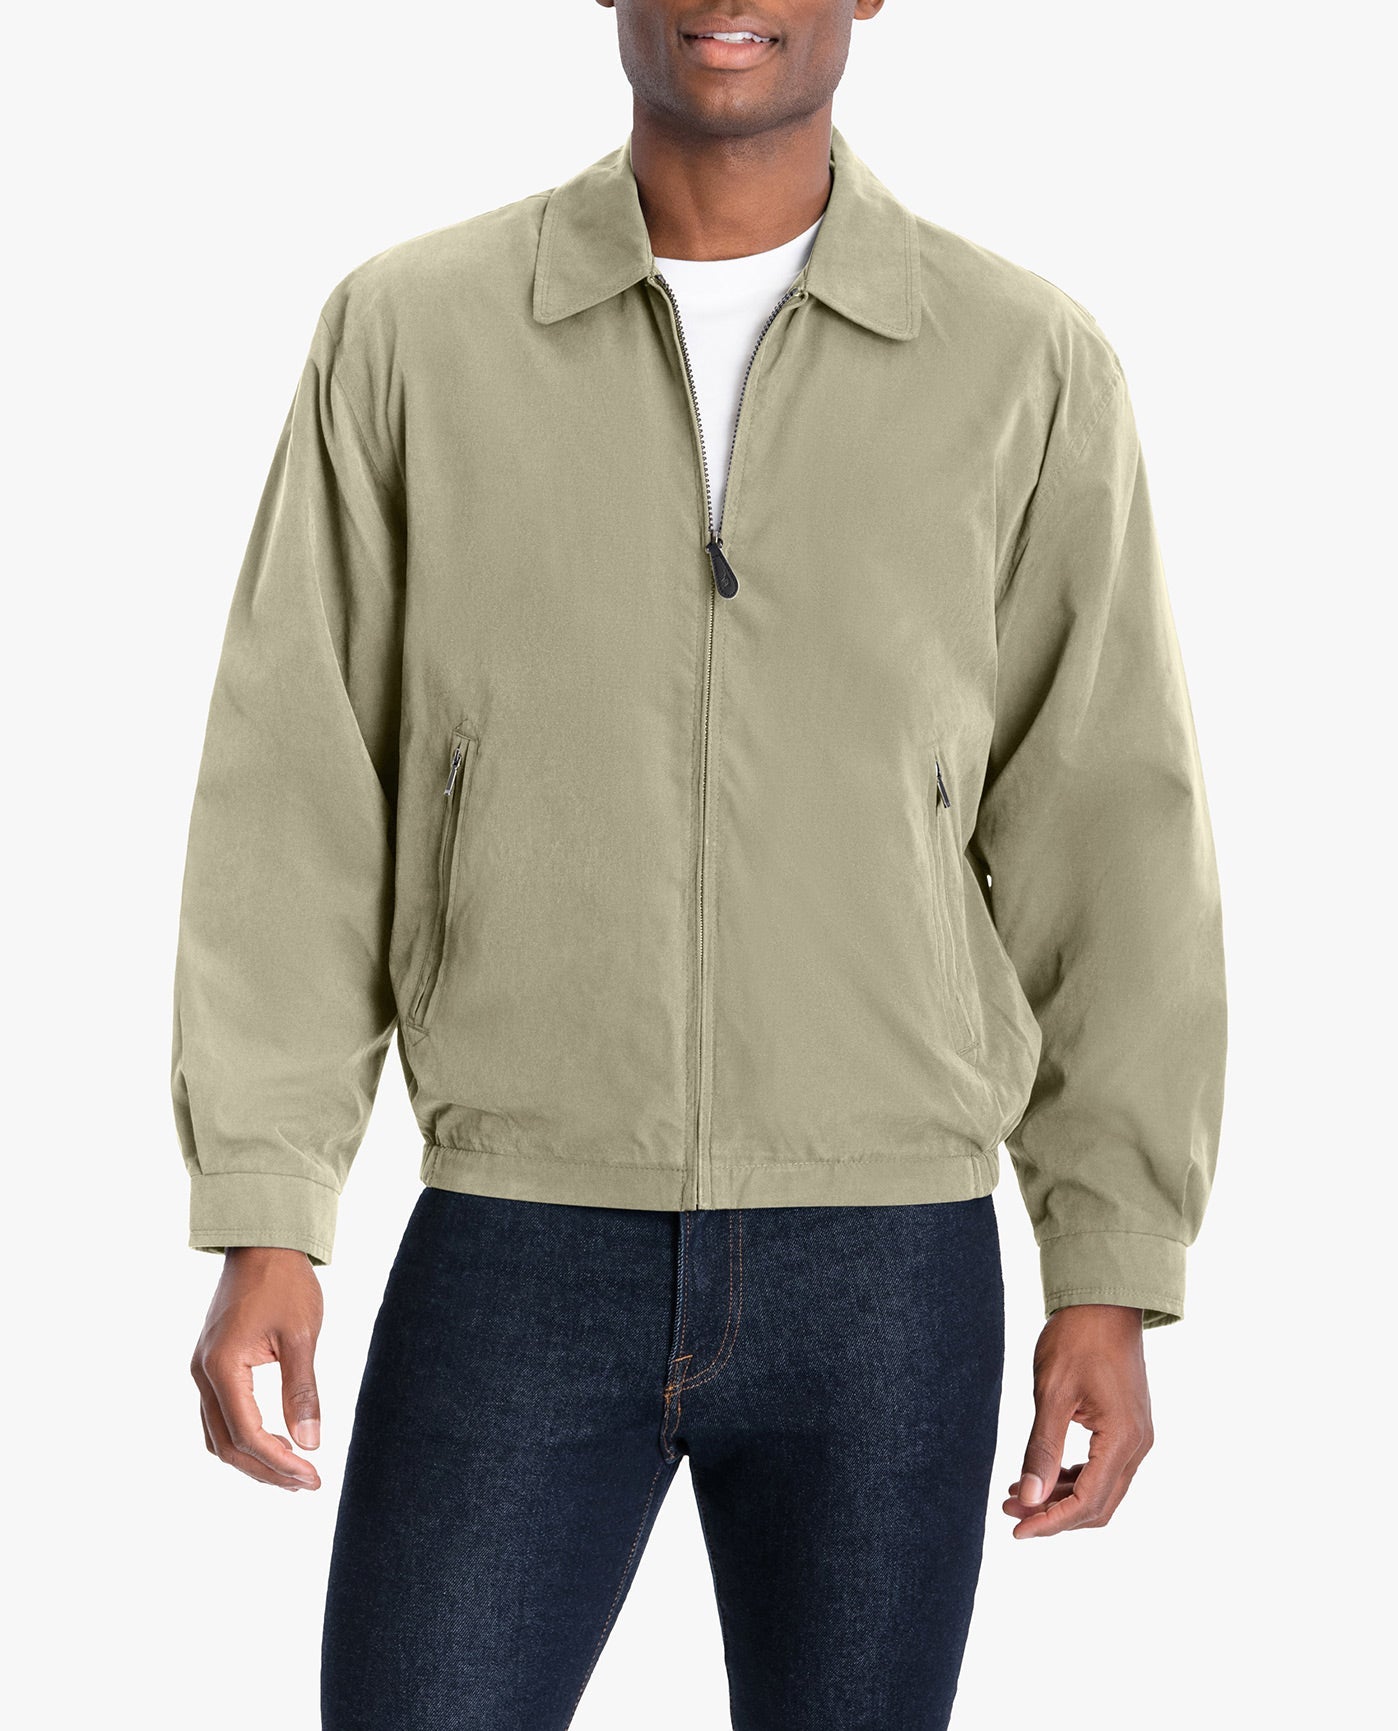 FRONT OF LIGHT WEIGHT ZIP FRONT GOLF JACKET | CEMENT